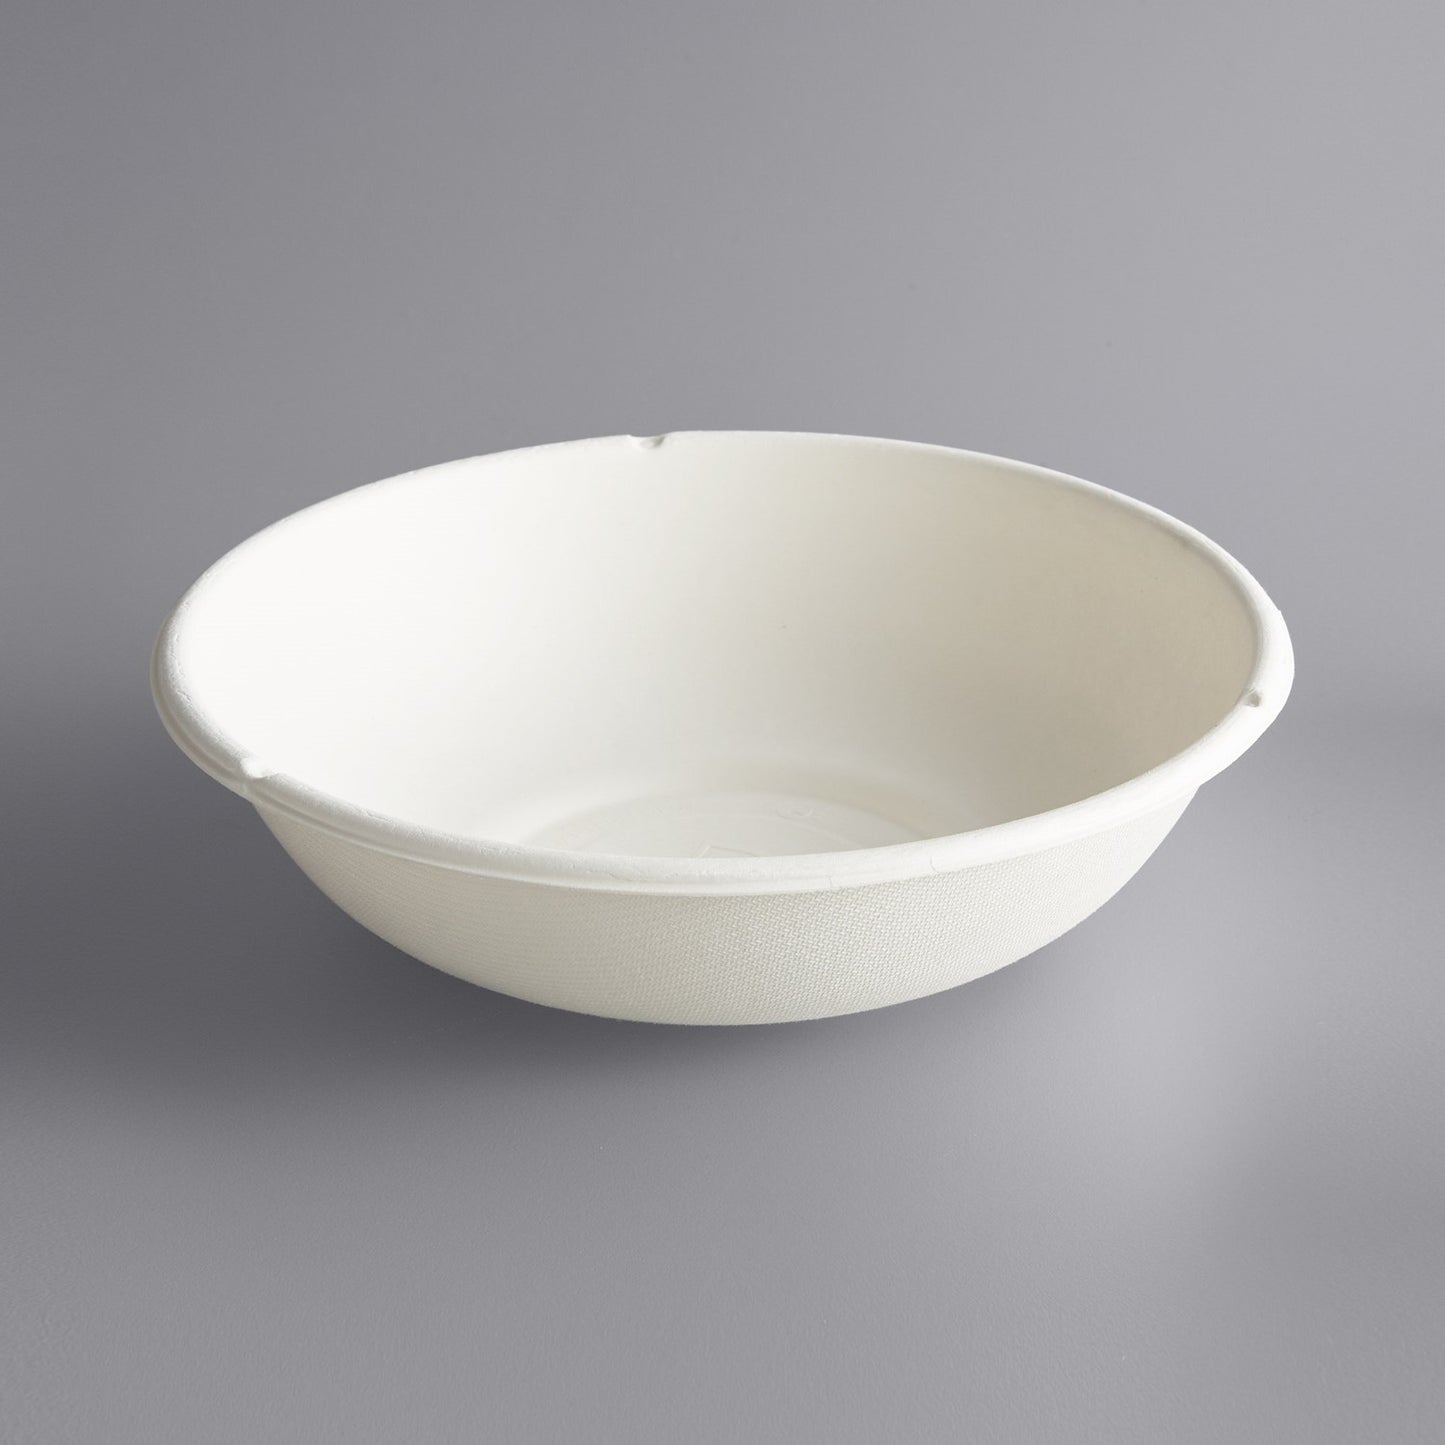 Take-Out Container Round Bowl 8" 32oz 1 Compartment Eco-Friendly Natural 300 Pack